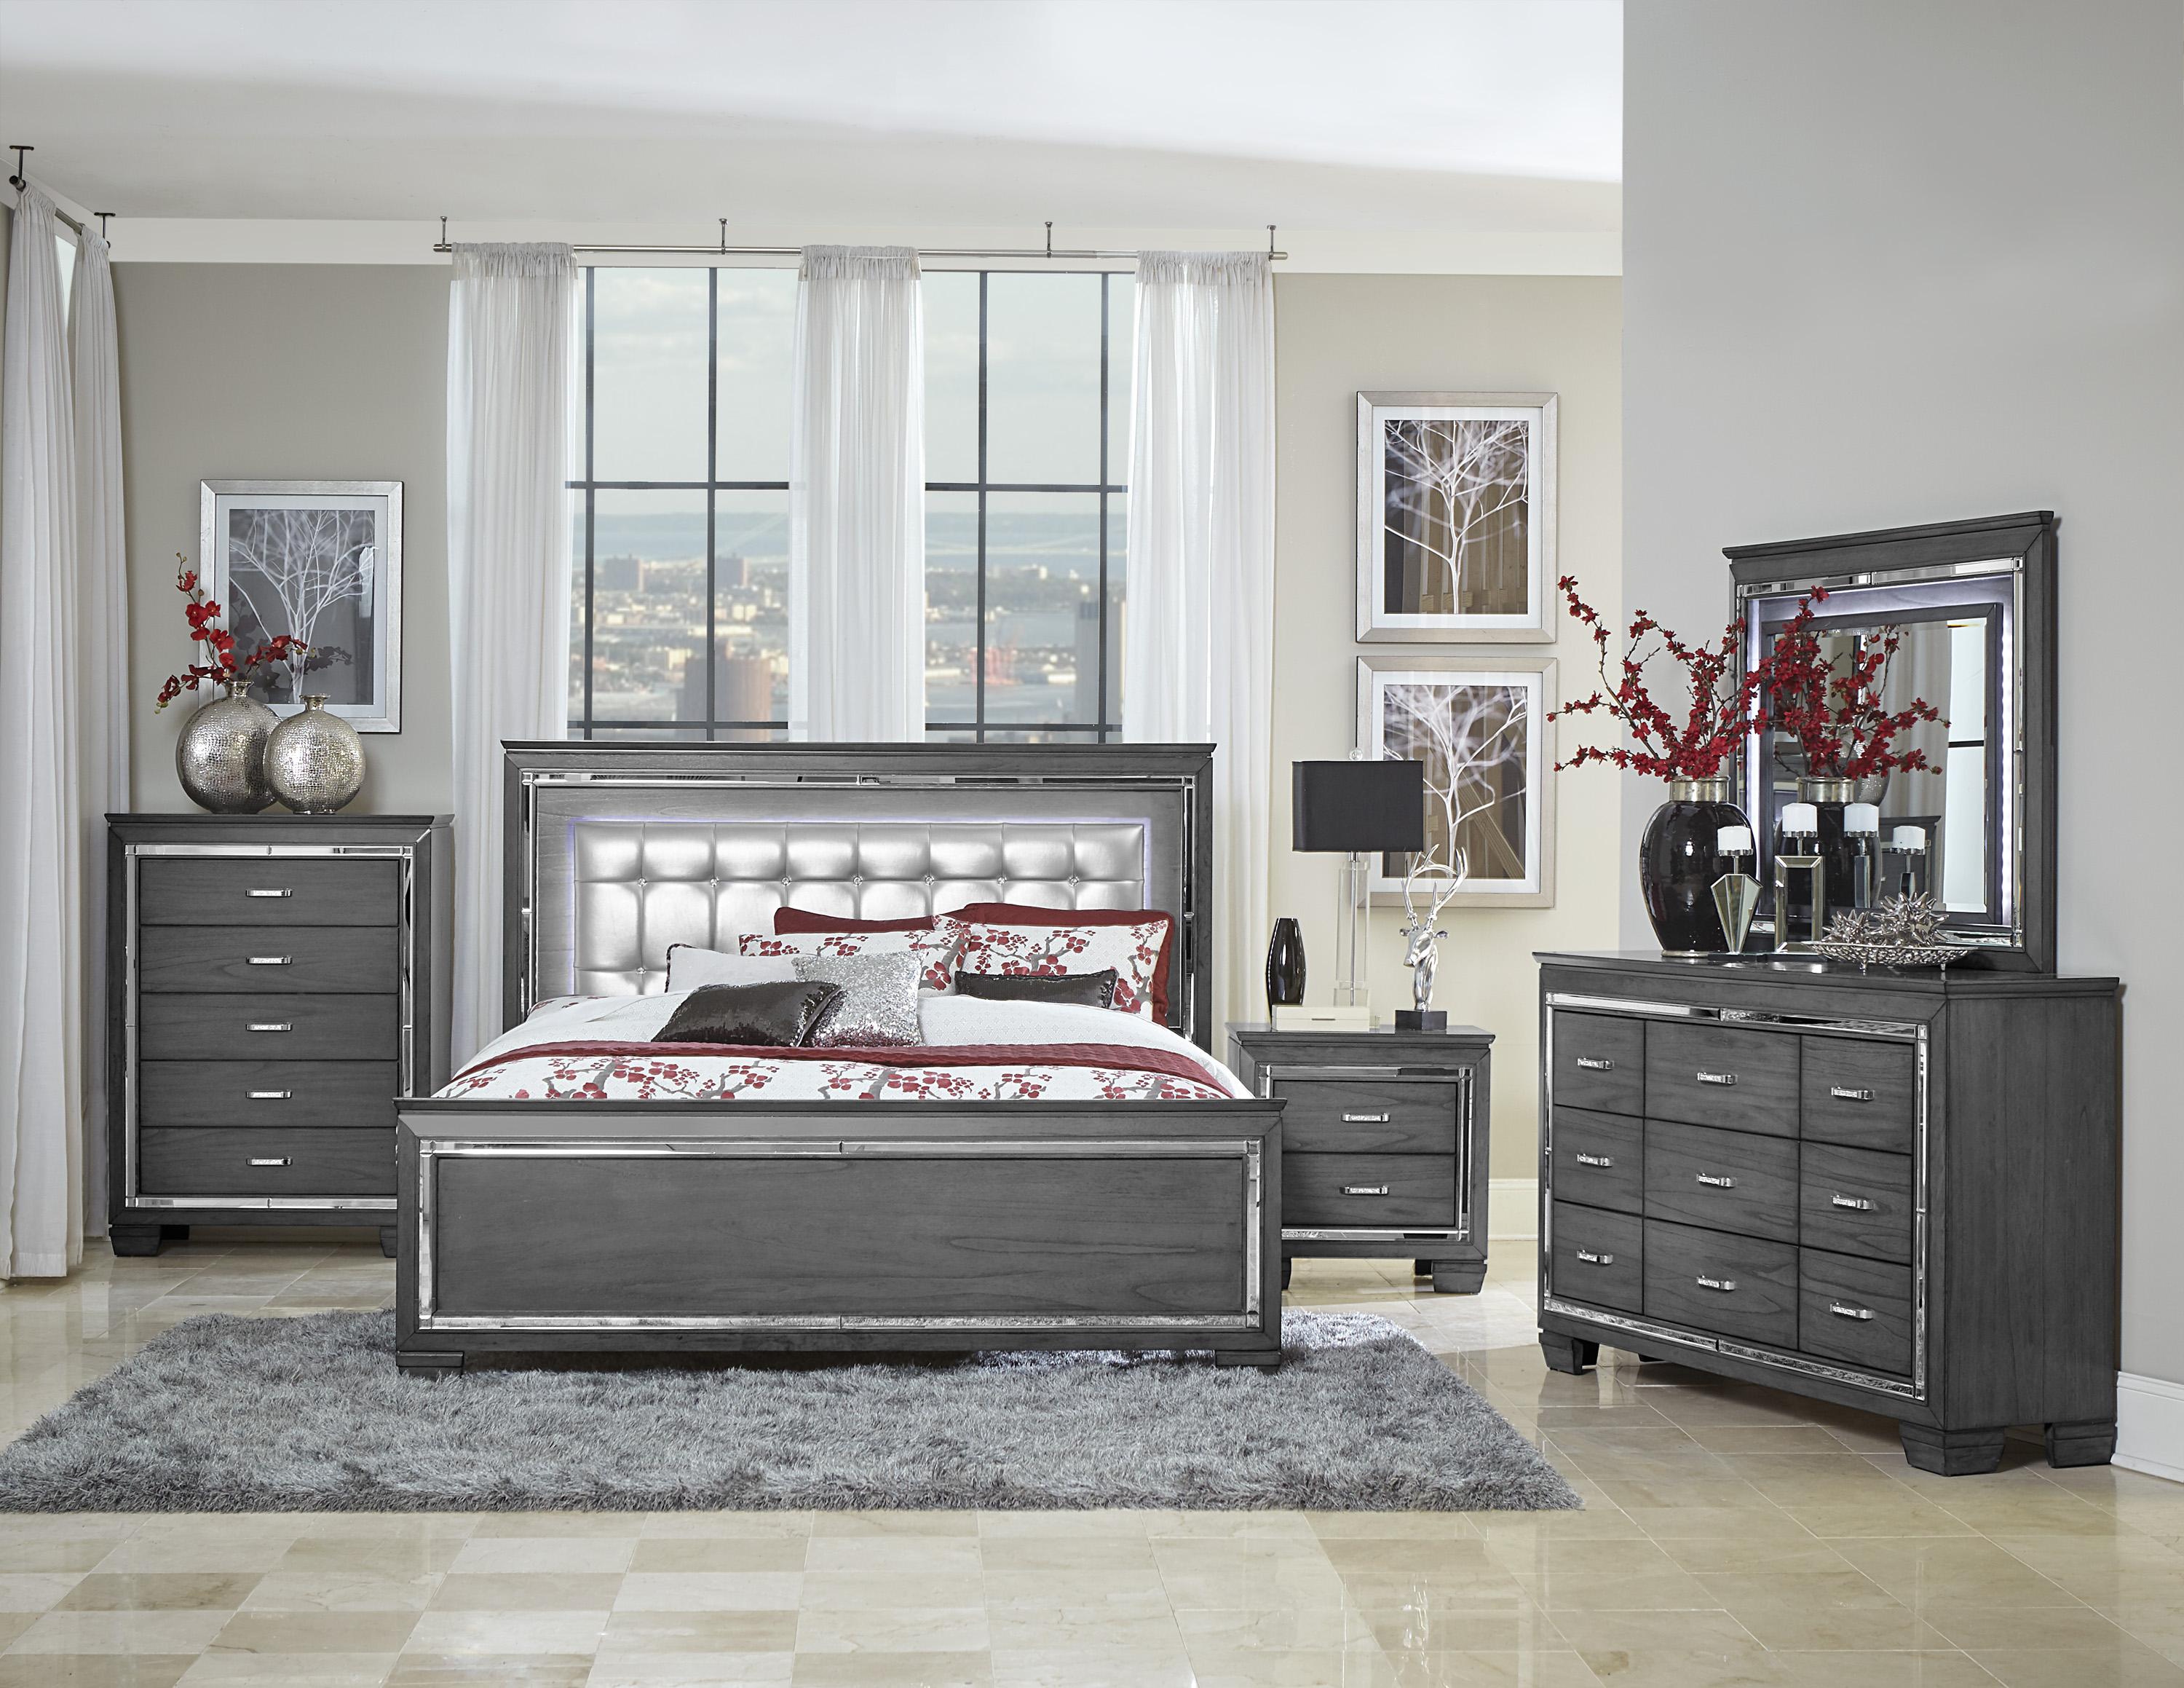 Modern Bedroom Set 1916KGY-1CK-5PC Allura 1916KGY-1CK-5PC in Gray Faux Leather